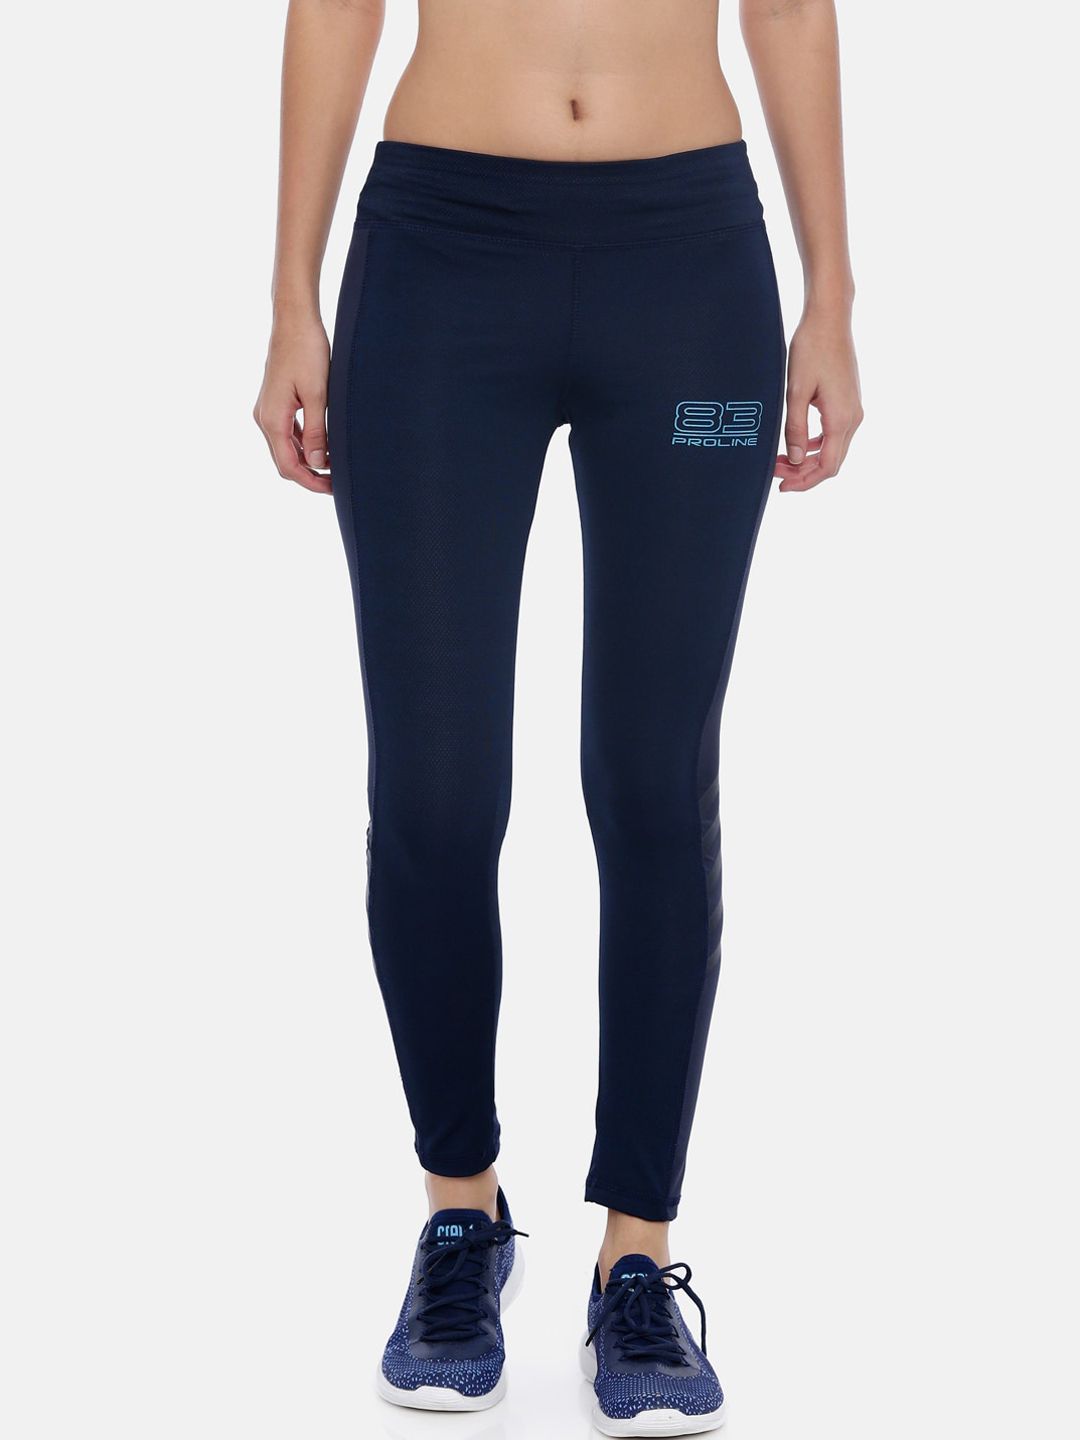 Proline Women Navy Blue Track Pants Price in India